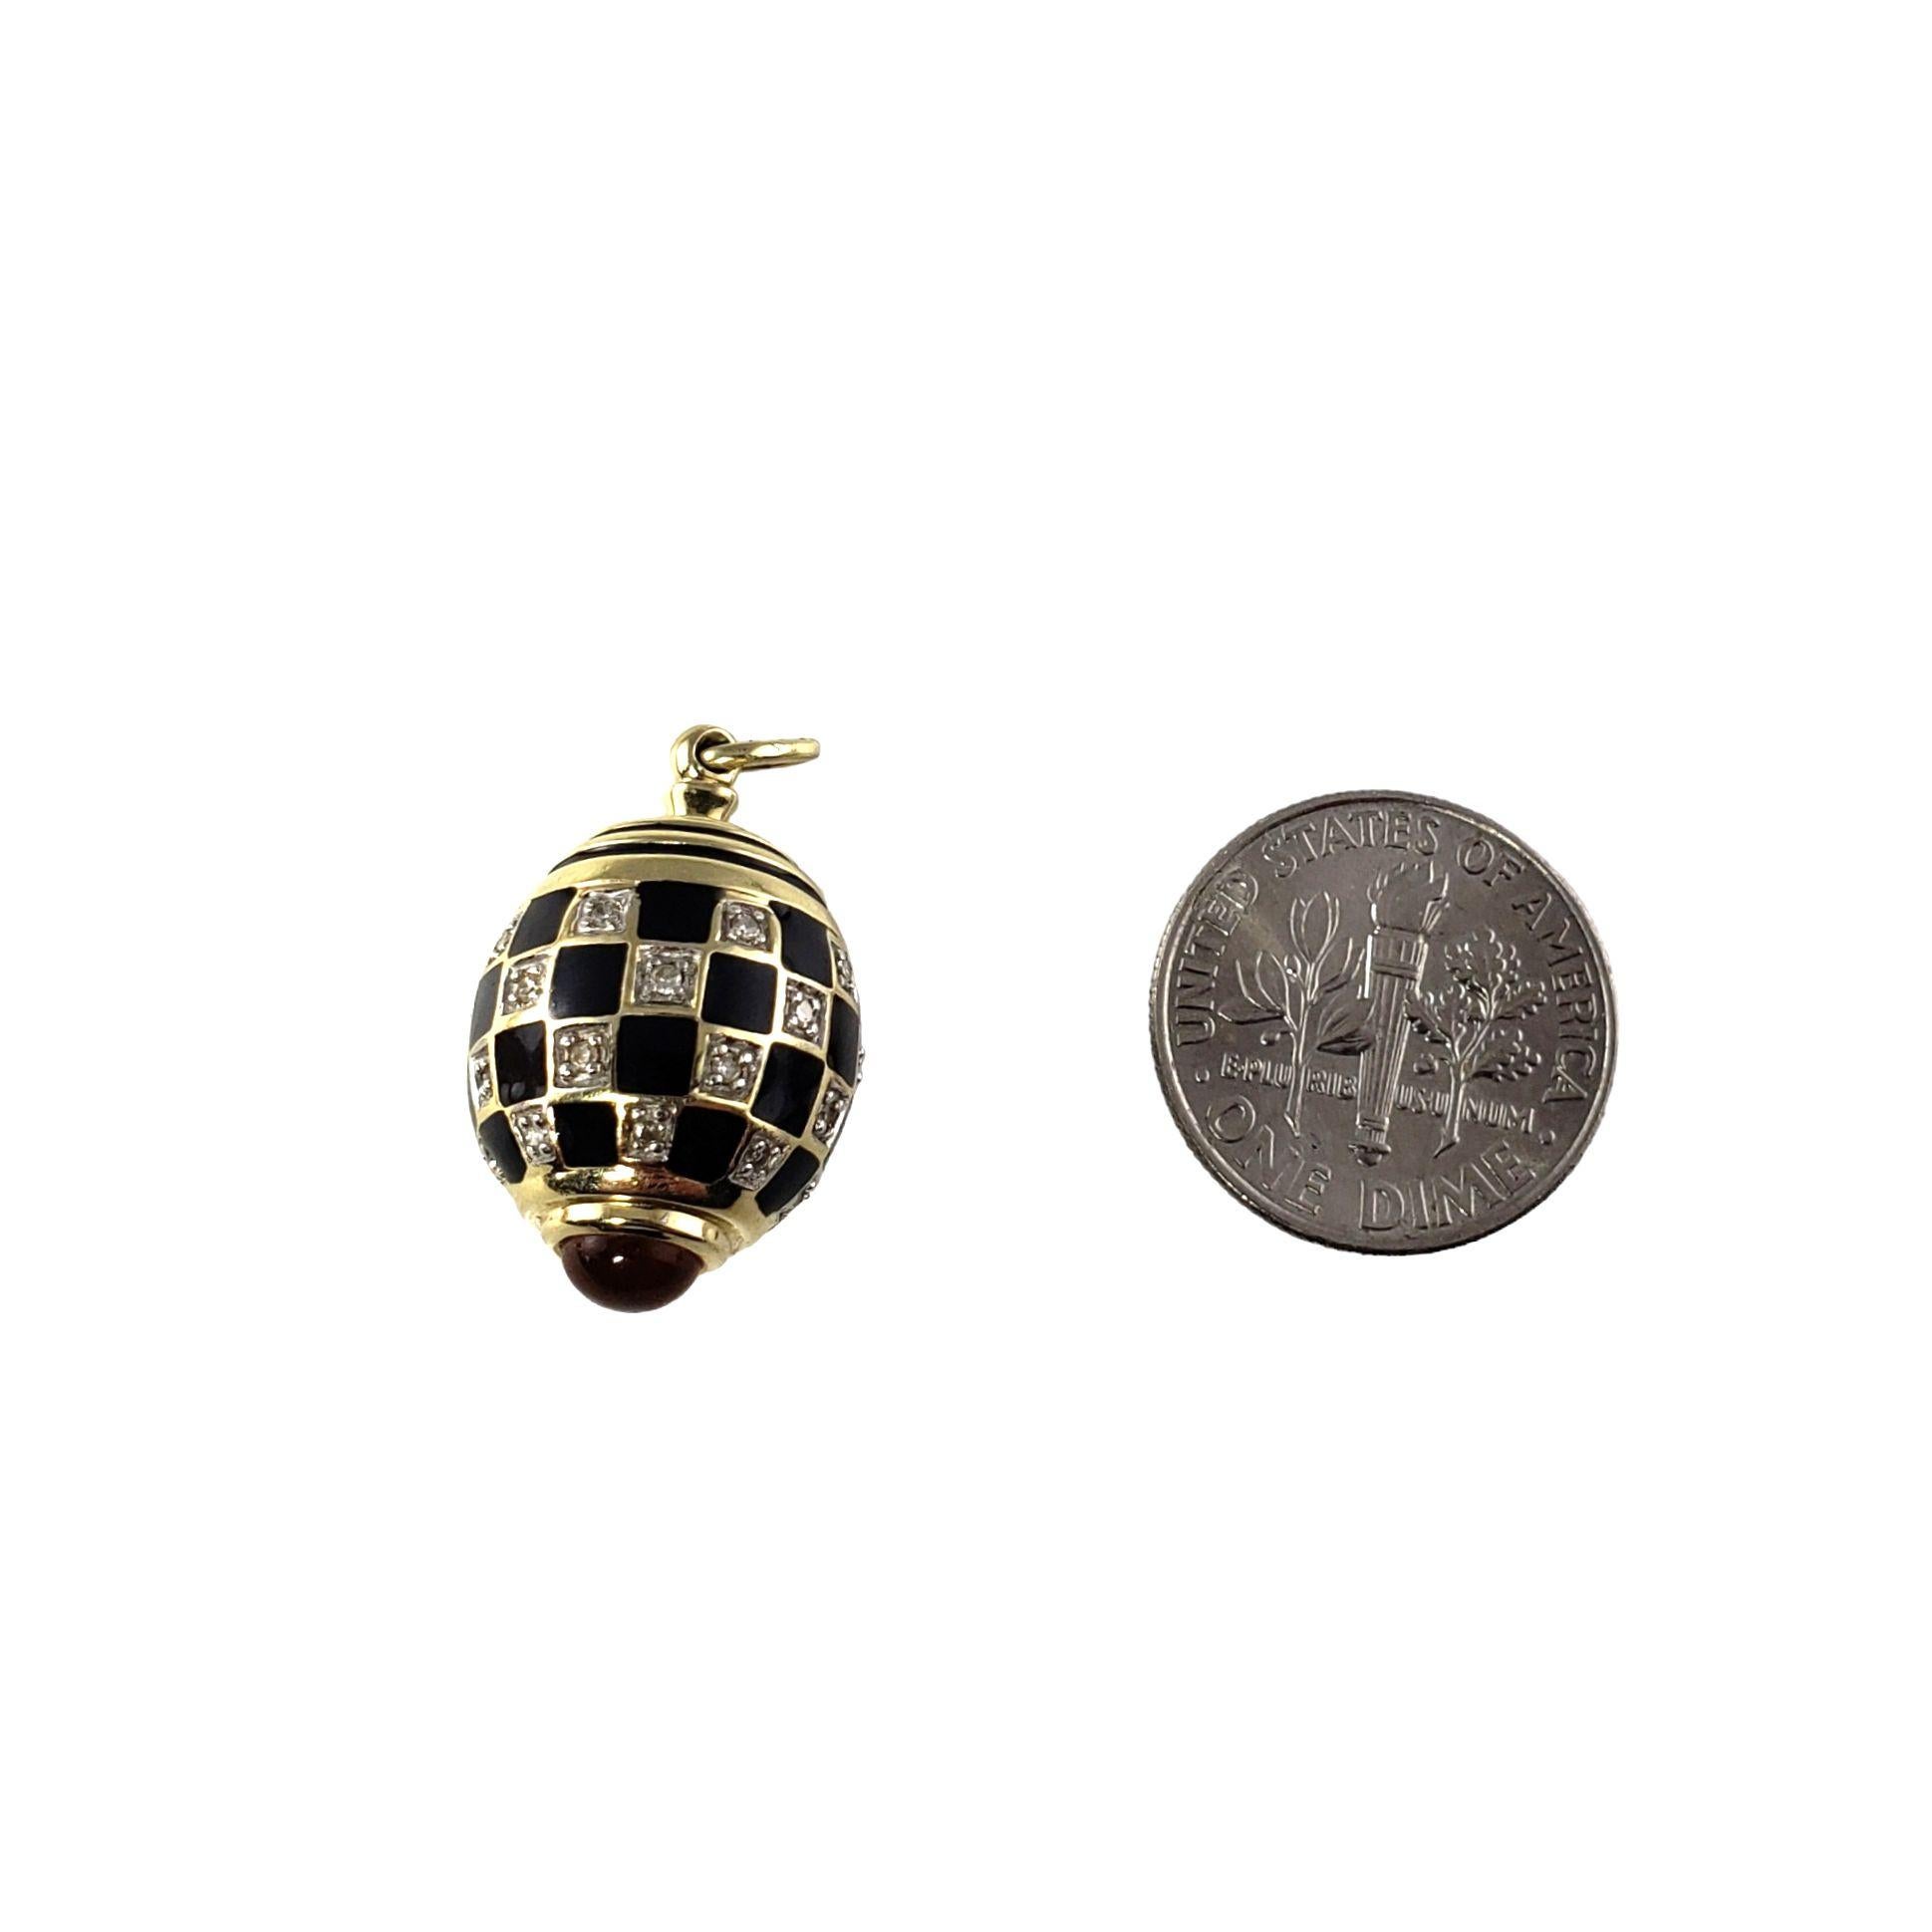 Vintage 14 Karat Yellow Gold Diamond and Onyx Charm-

This stunning diamond and onyx charm is accented with one yellow cabochon gemstone set in beautifully detailed 14K yellow gold.

Approximate total diamond weight: .15 ct.

Diamond color: